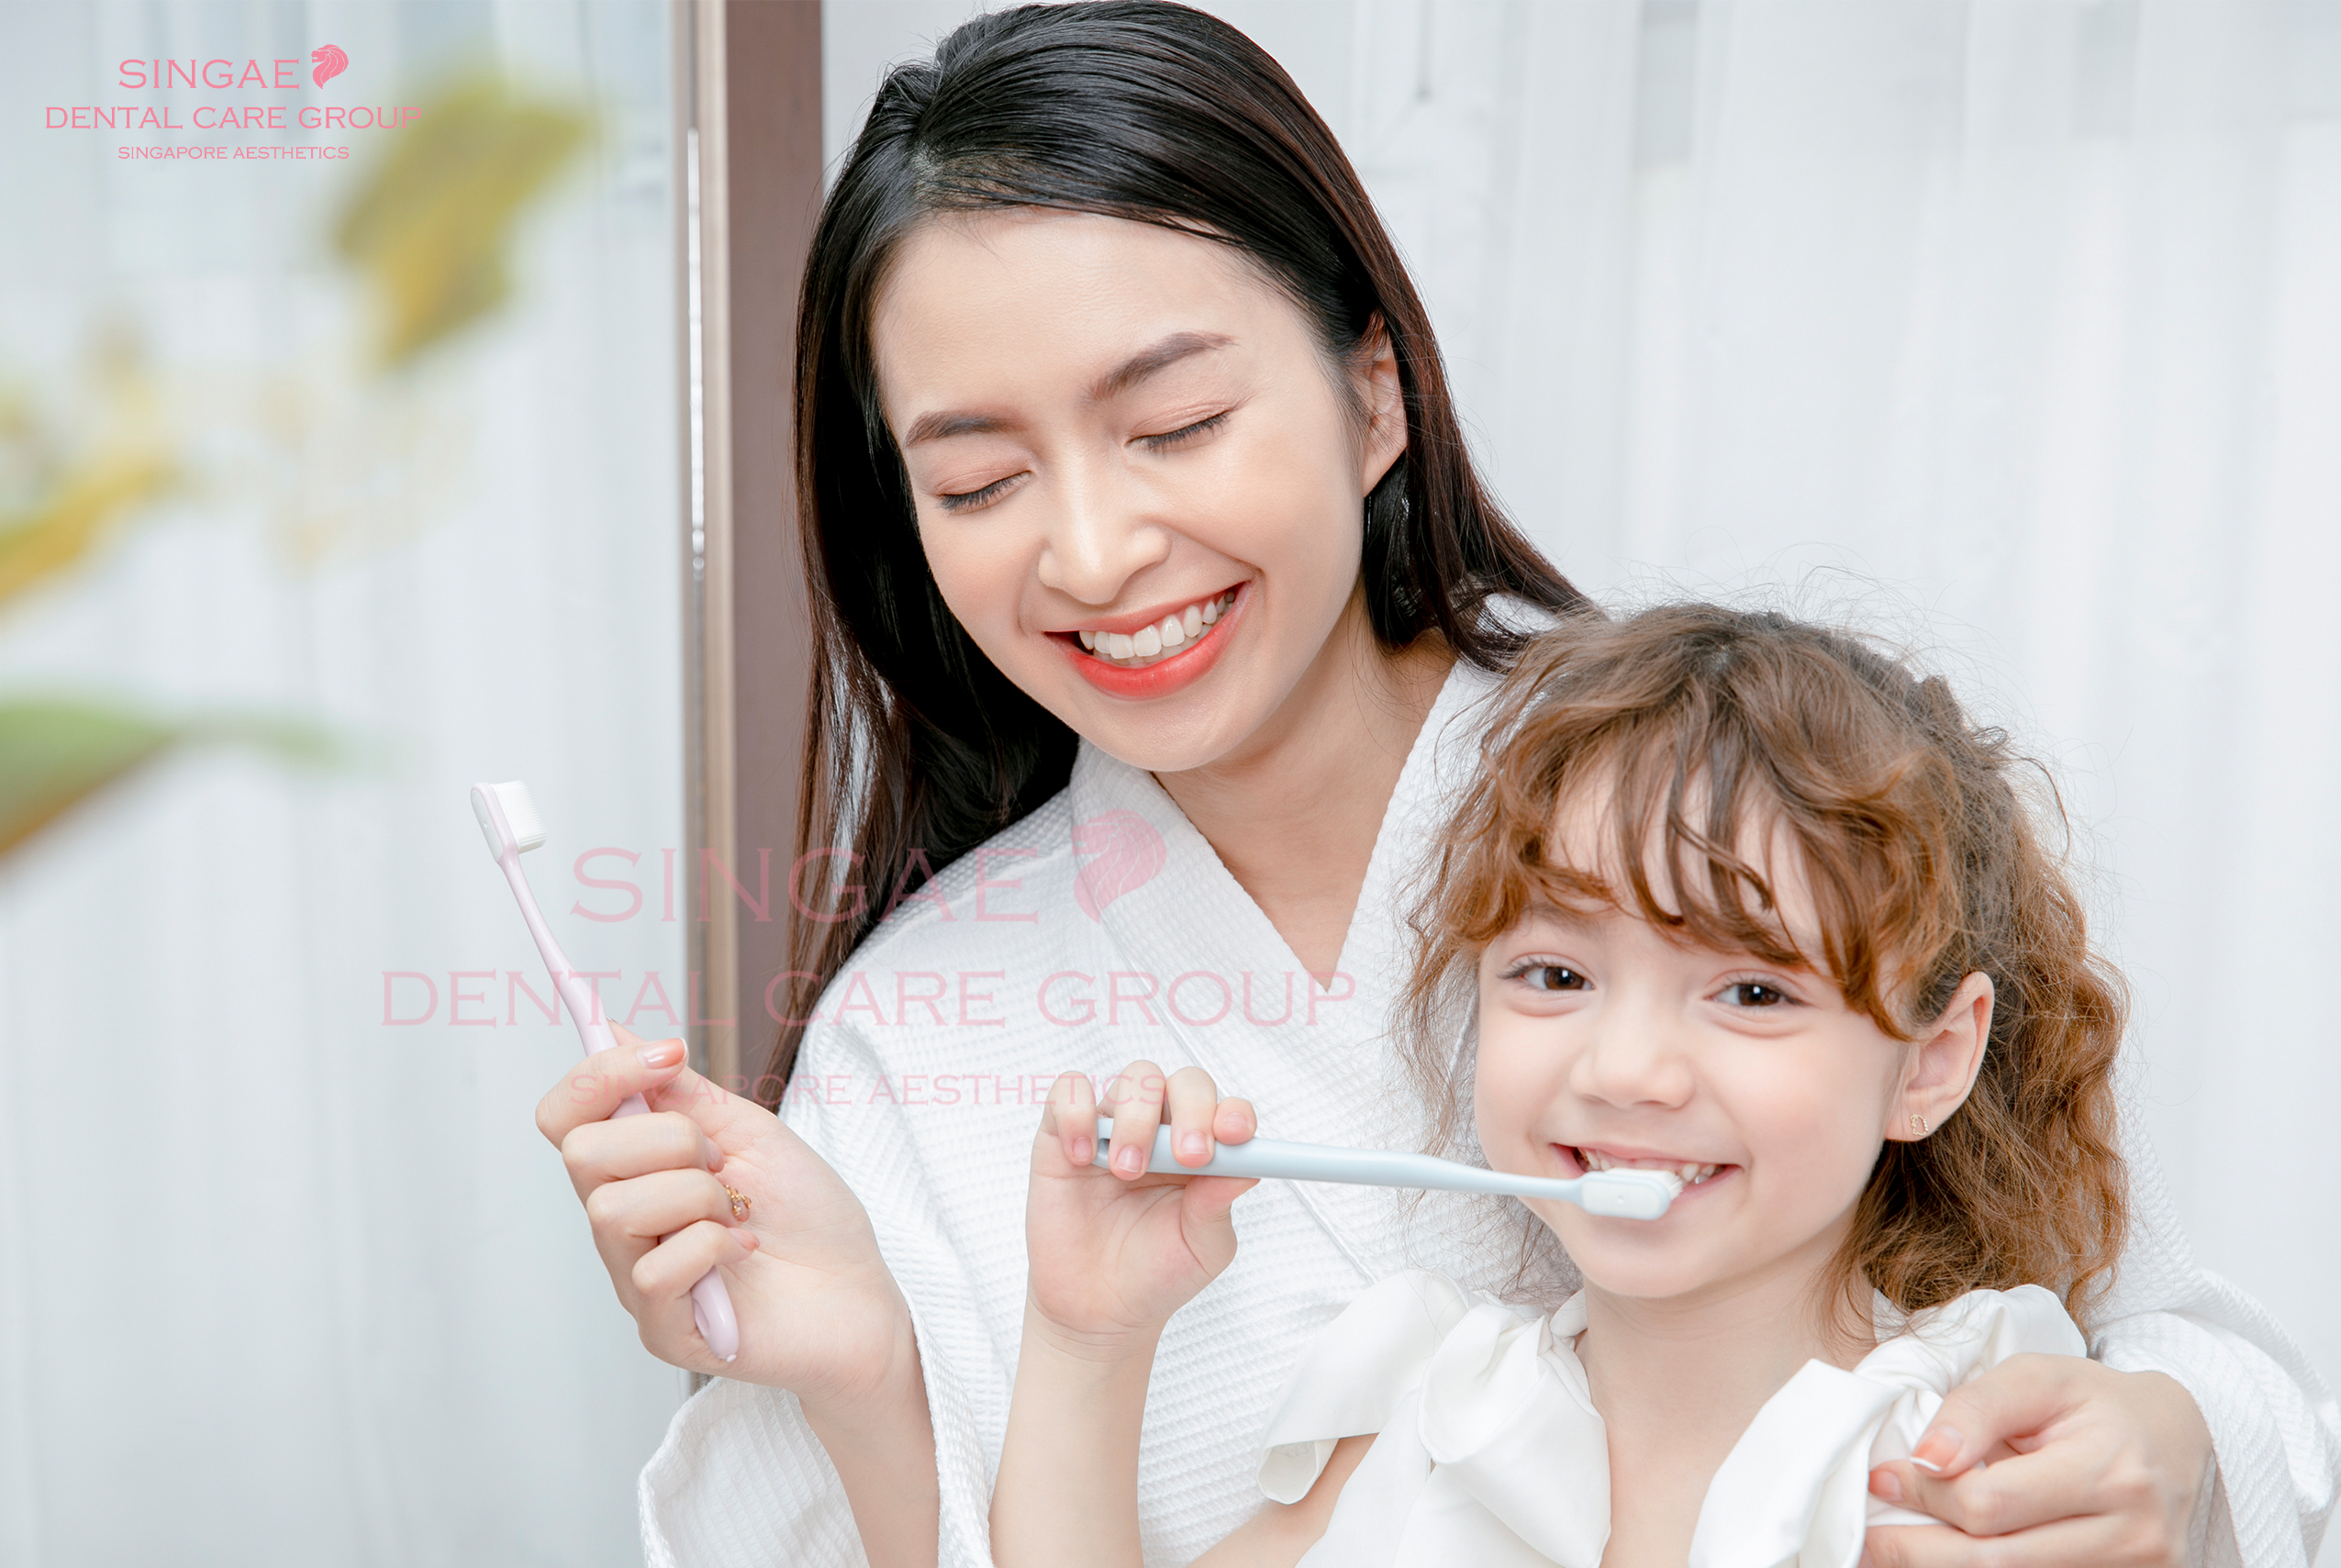 [HOW TO BRUSH TEETH PROPERLY] STANDARD DENTAL THAT YOU SHOULD KNOW